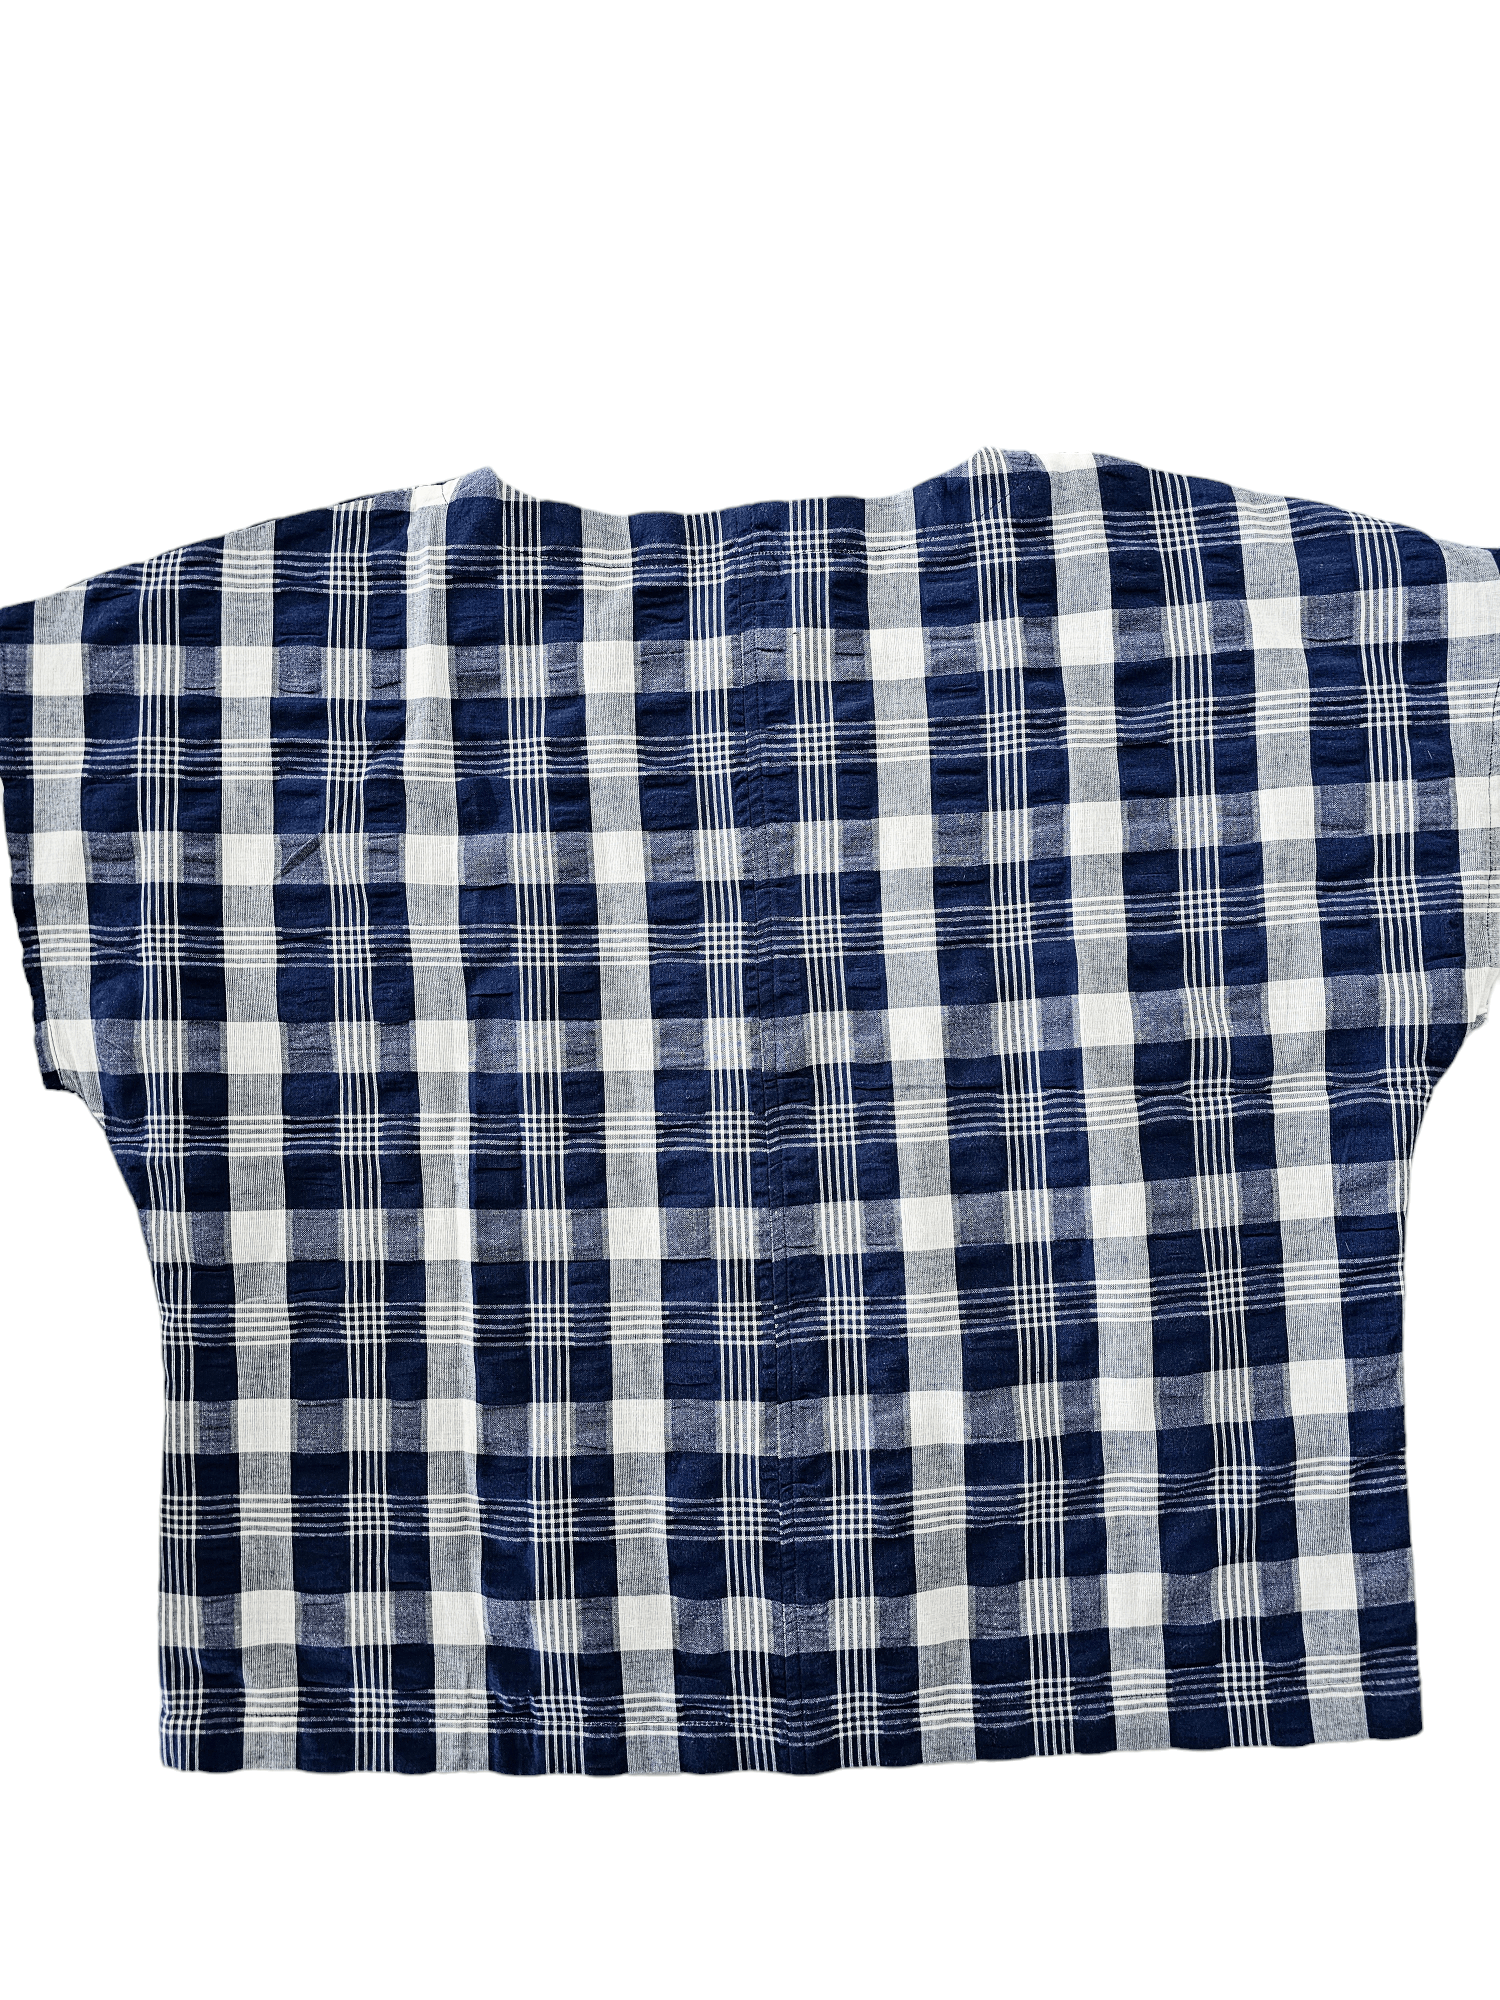 Organic Seersucker Shell Top - Madras check Shirts & Tops The Spotted Quoll 